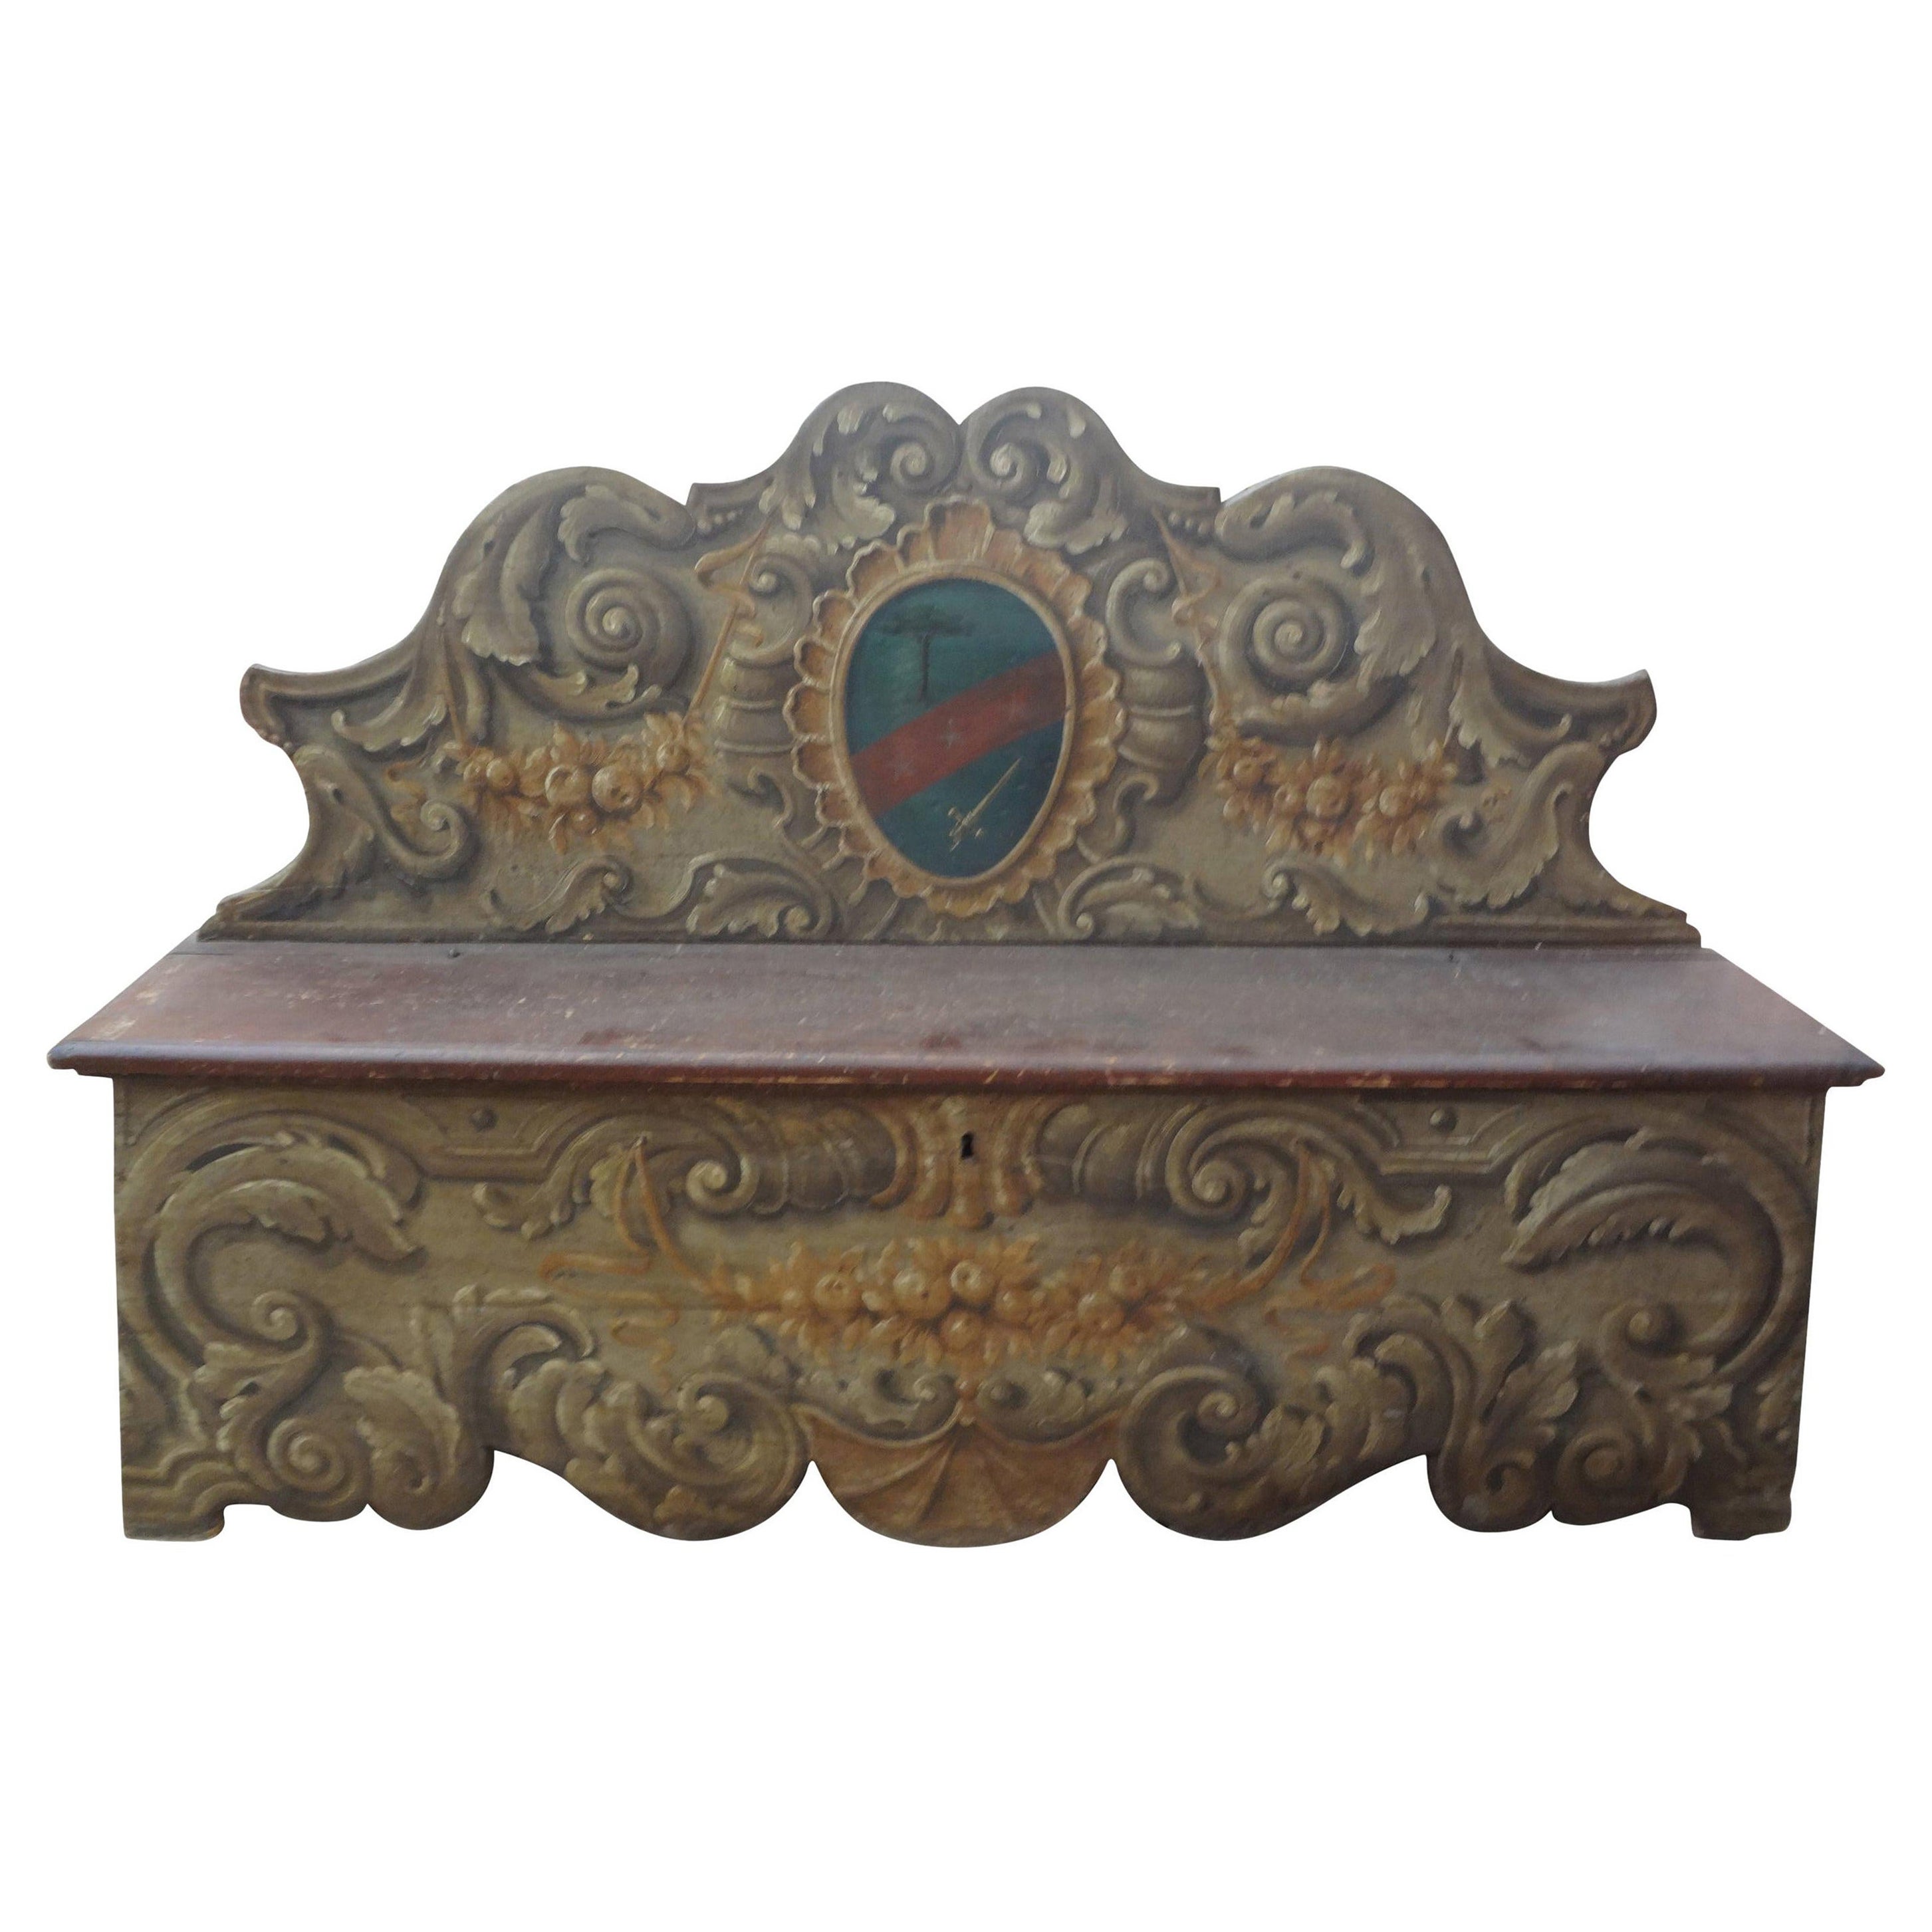 17th Century Tuscan Cassapanca or Bench with a Family Crest